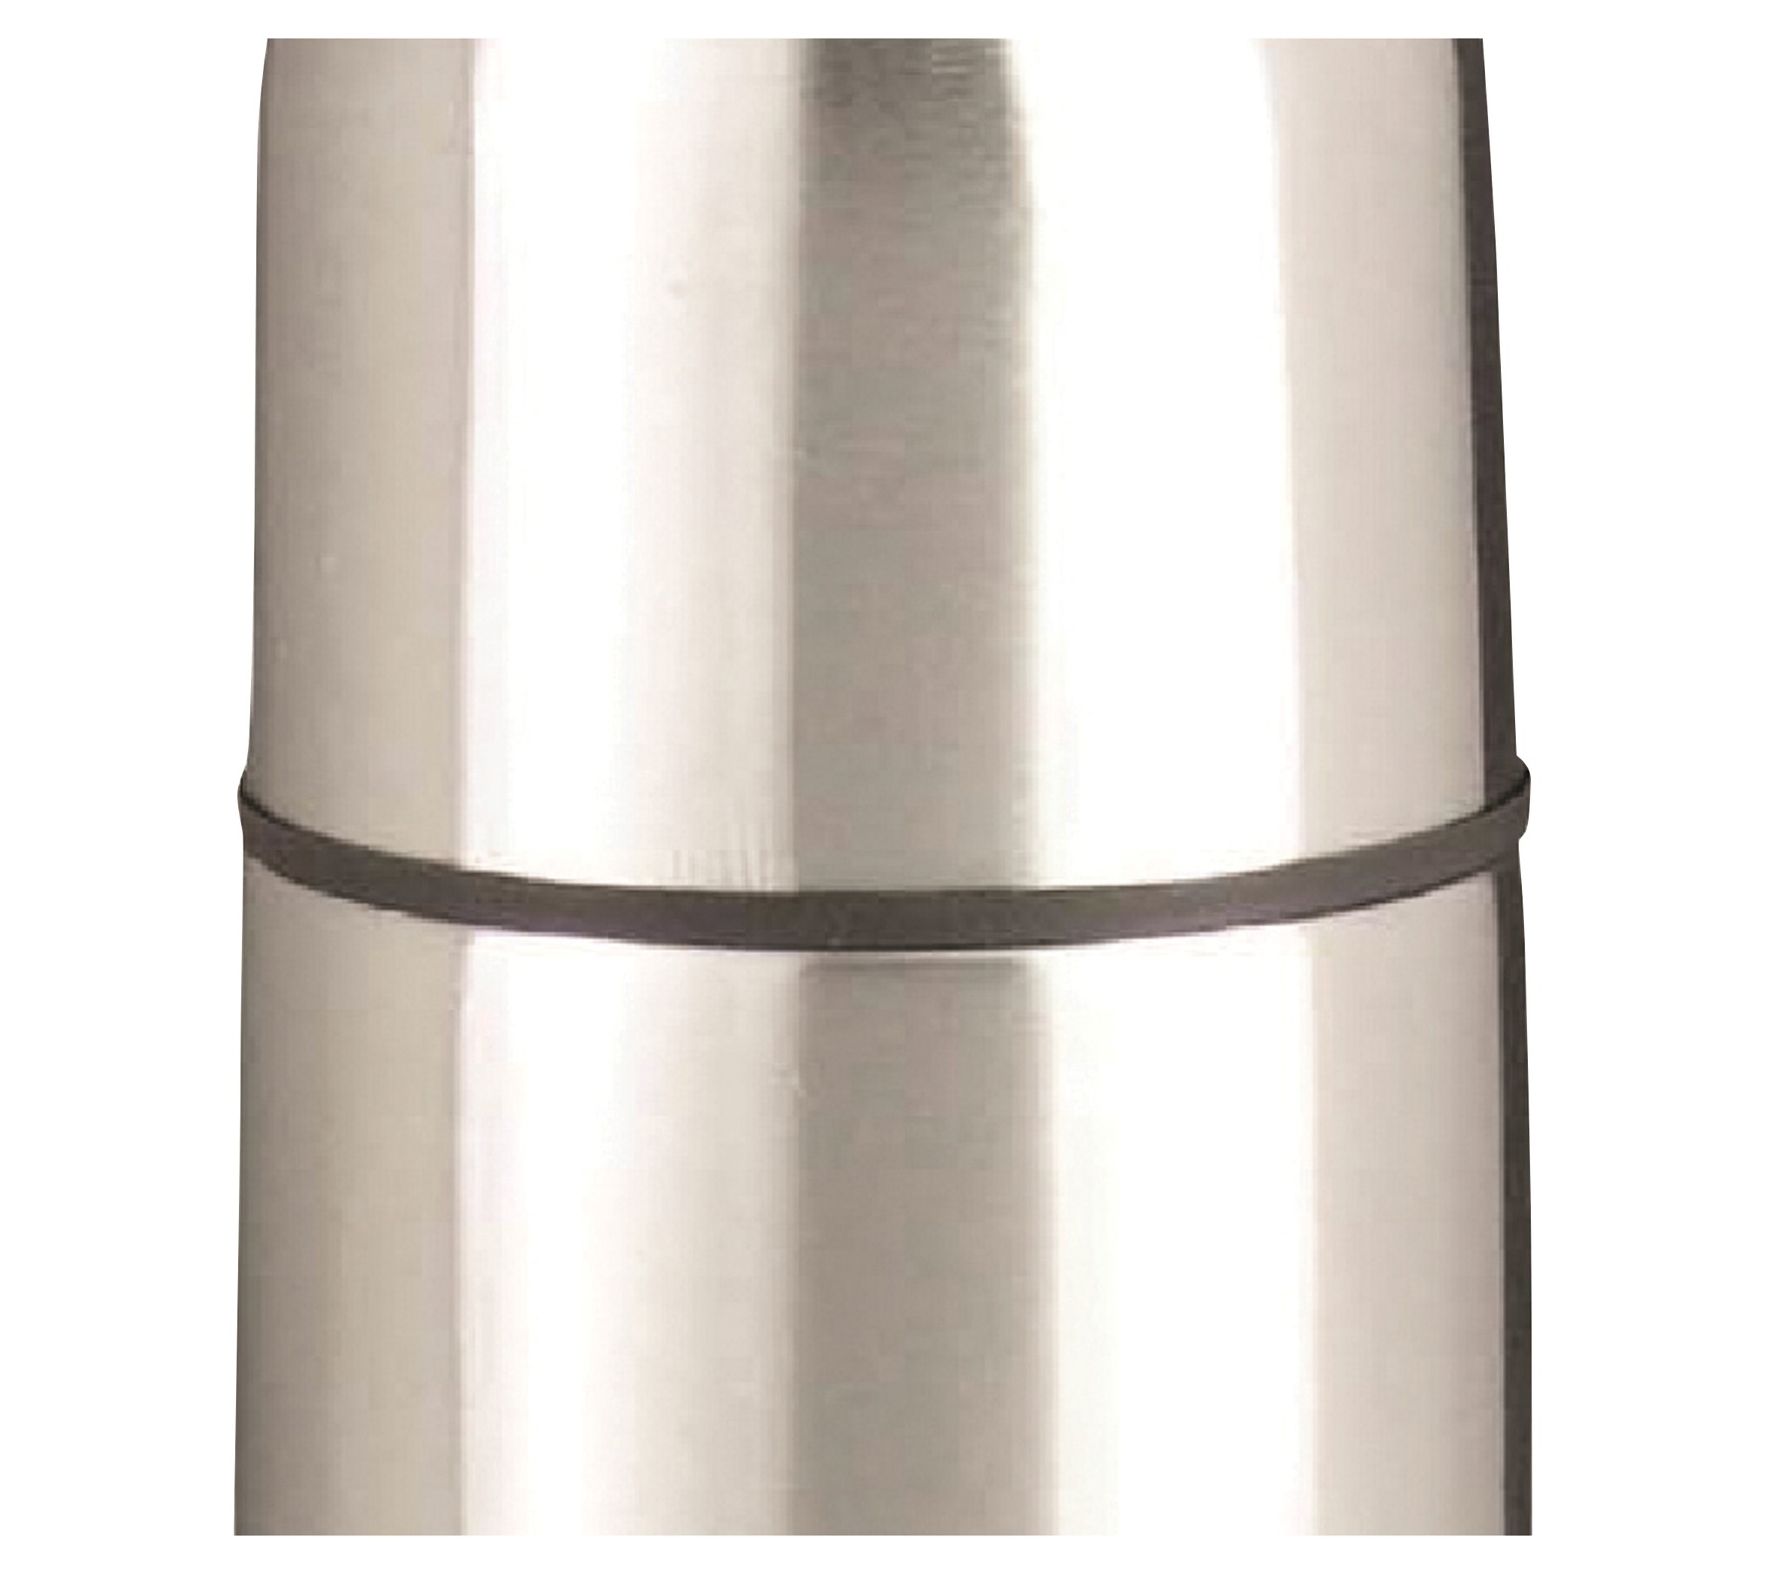 ChefGiant Stainless Steel Thermal Coffee & Cream Carafe 